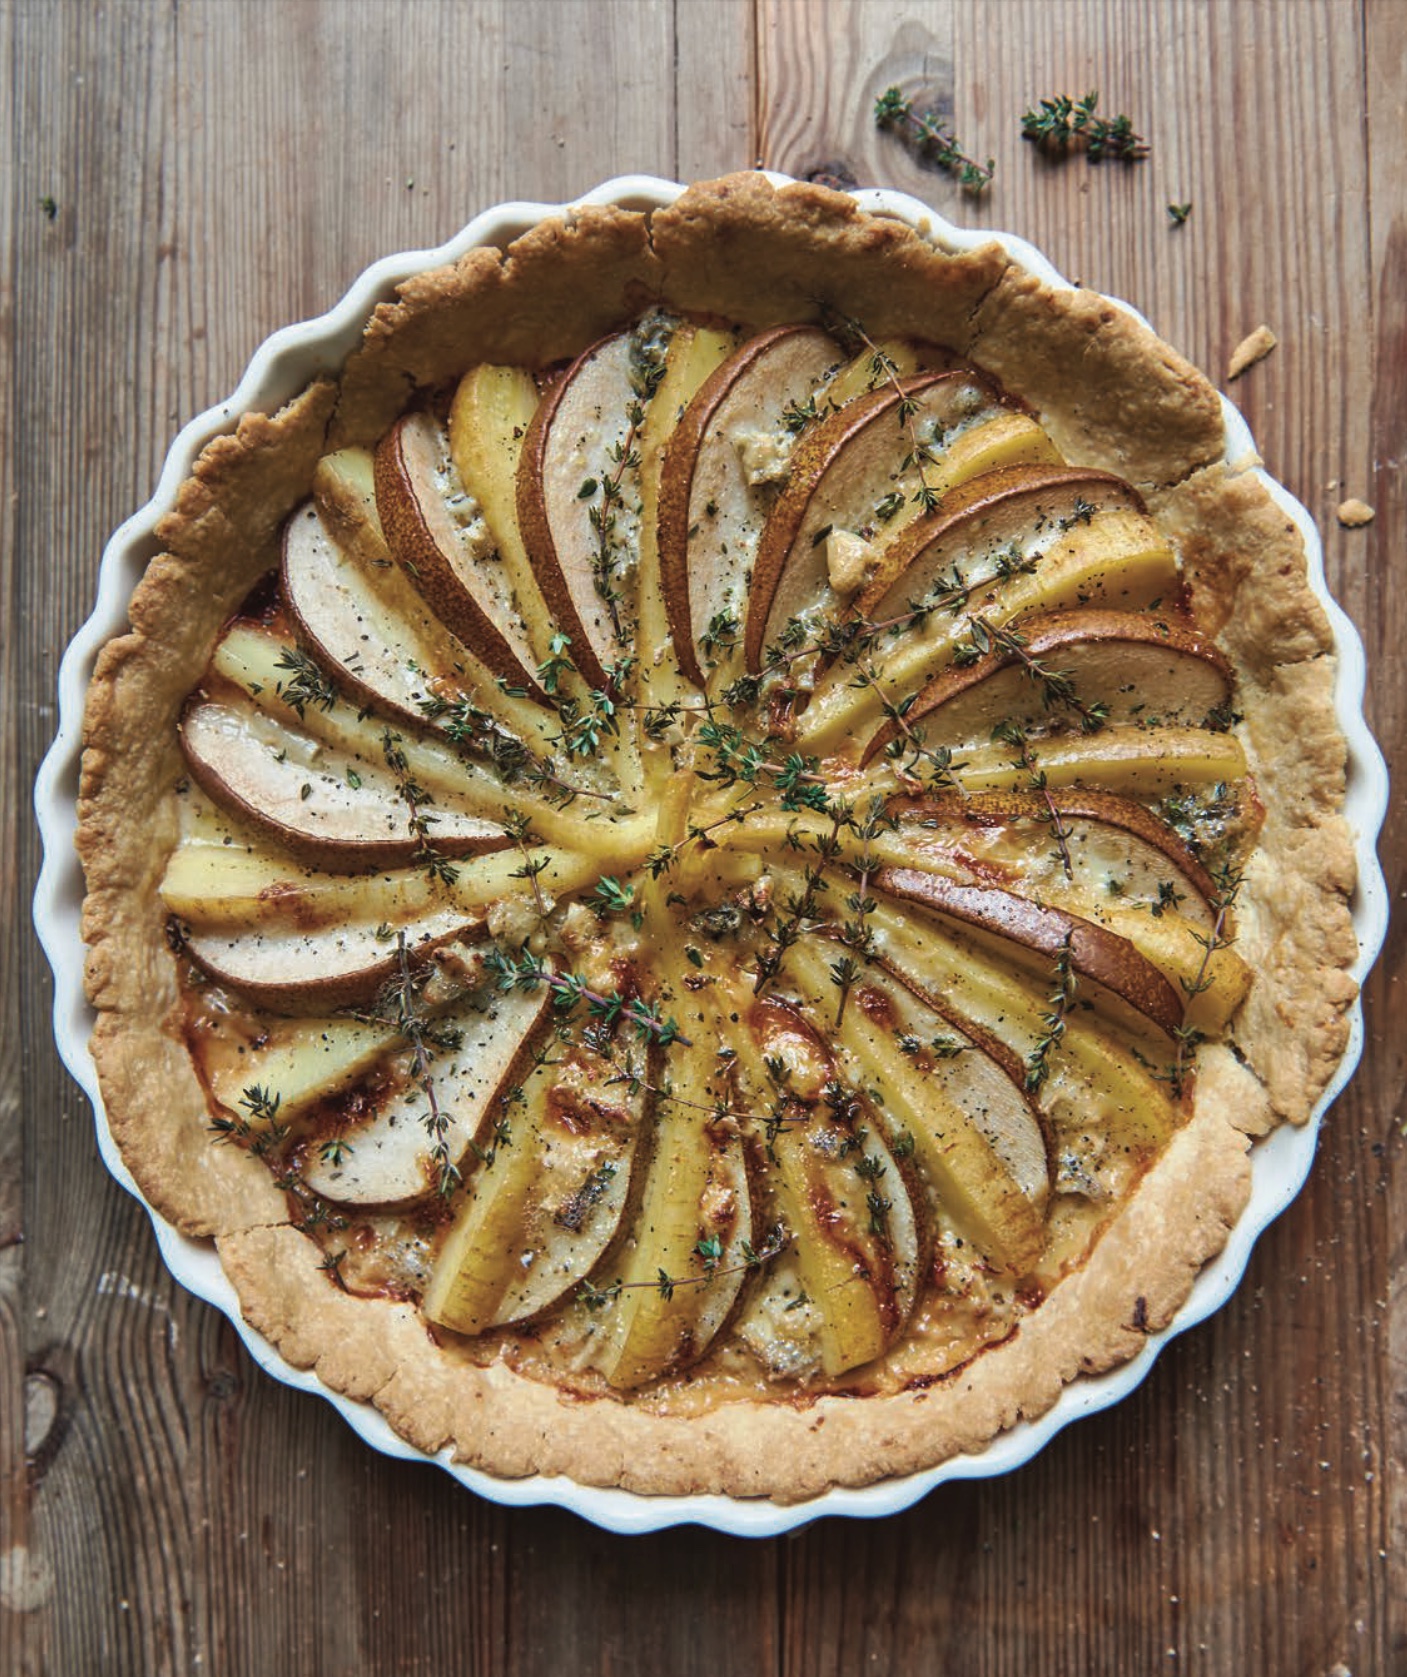 Parsnip and Pear Tart with Gorgonzola and Thyme - Cool Food Dude